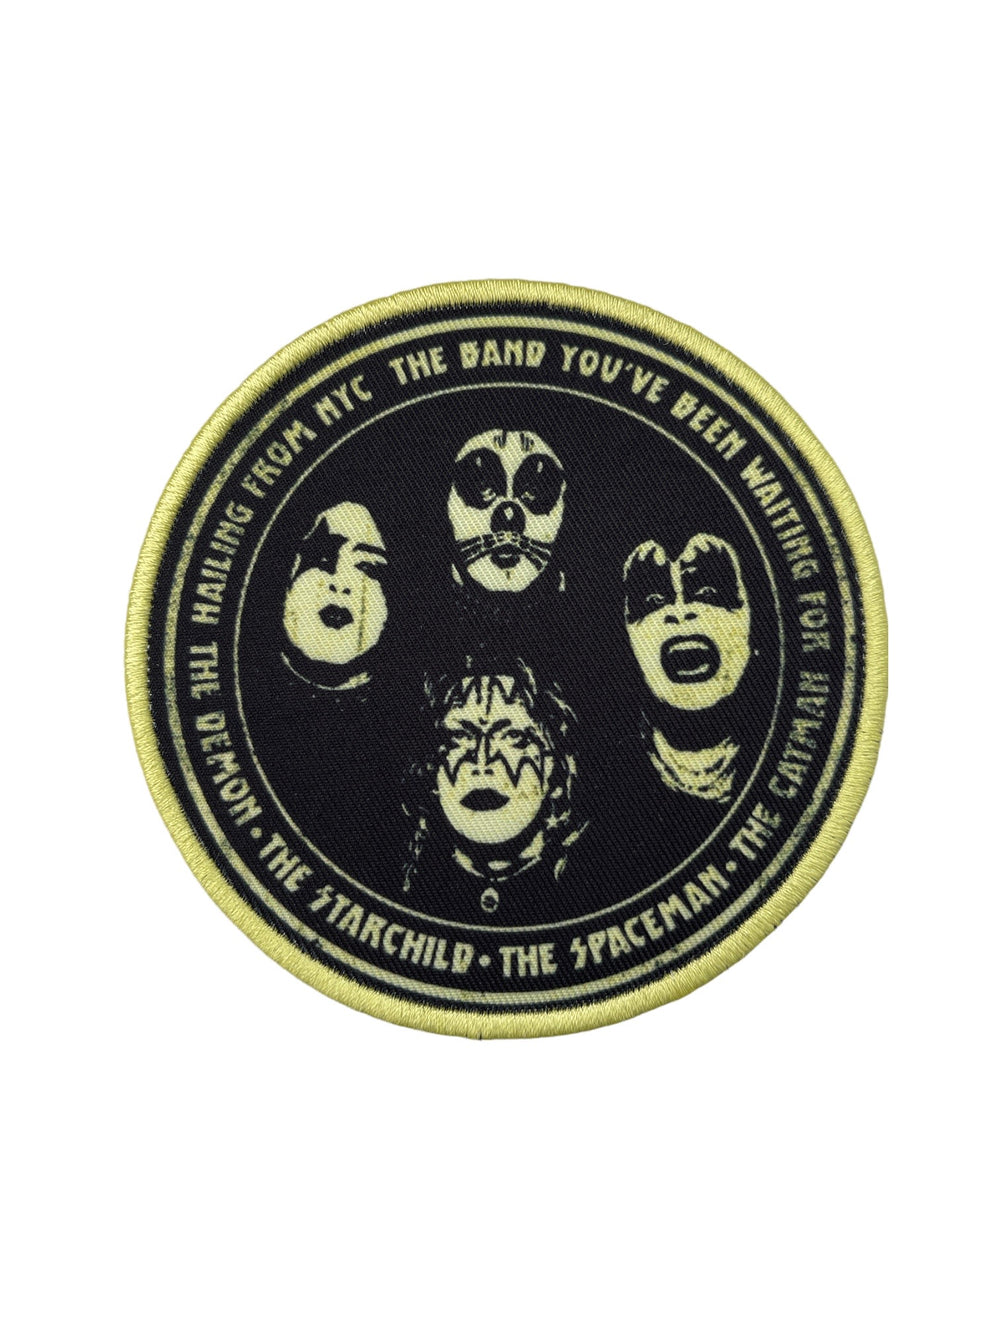 KISS Standard Patch: Hailing from NYC Official Woven Patch Brand New